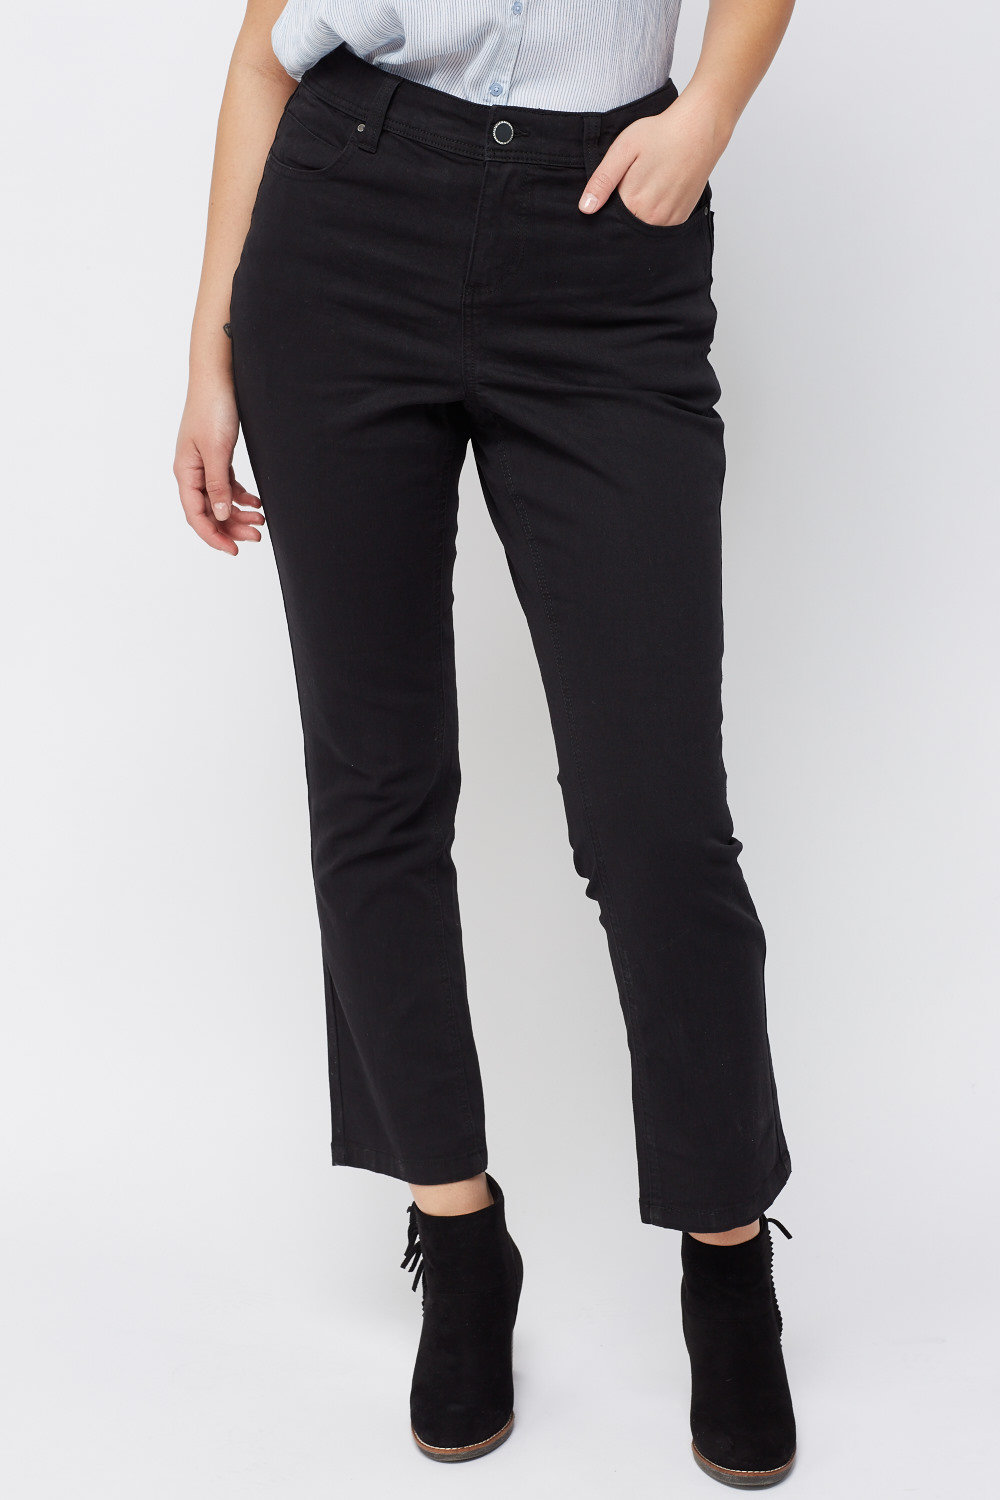 Straight Leg Charcoal Jeans - Just $7